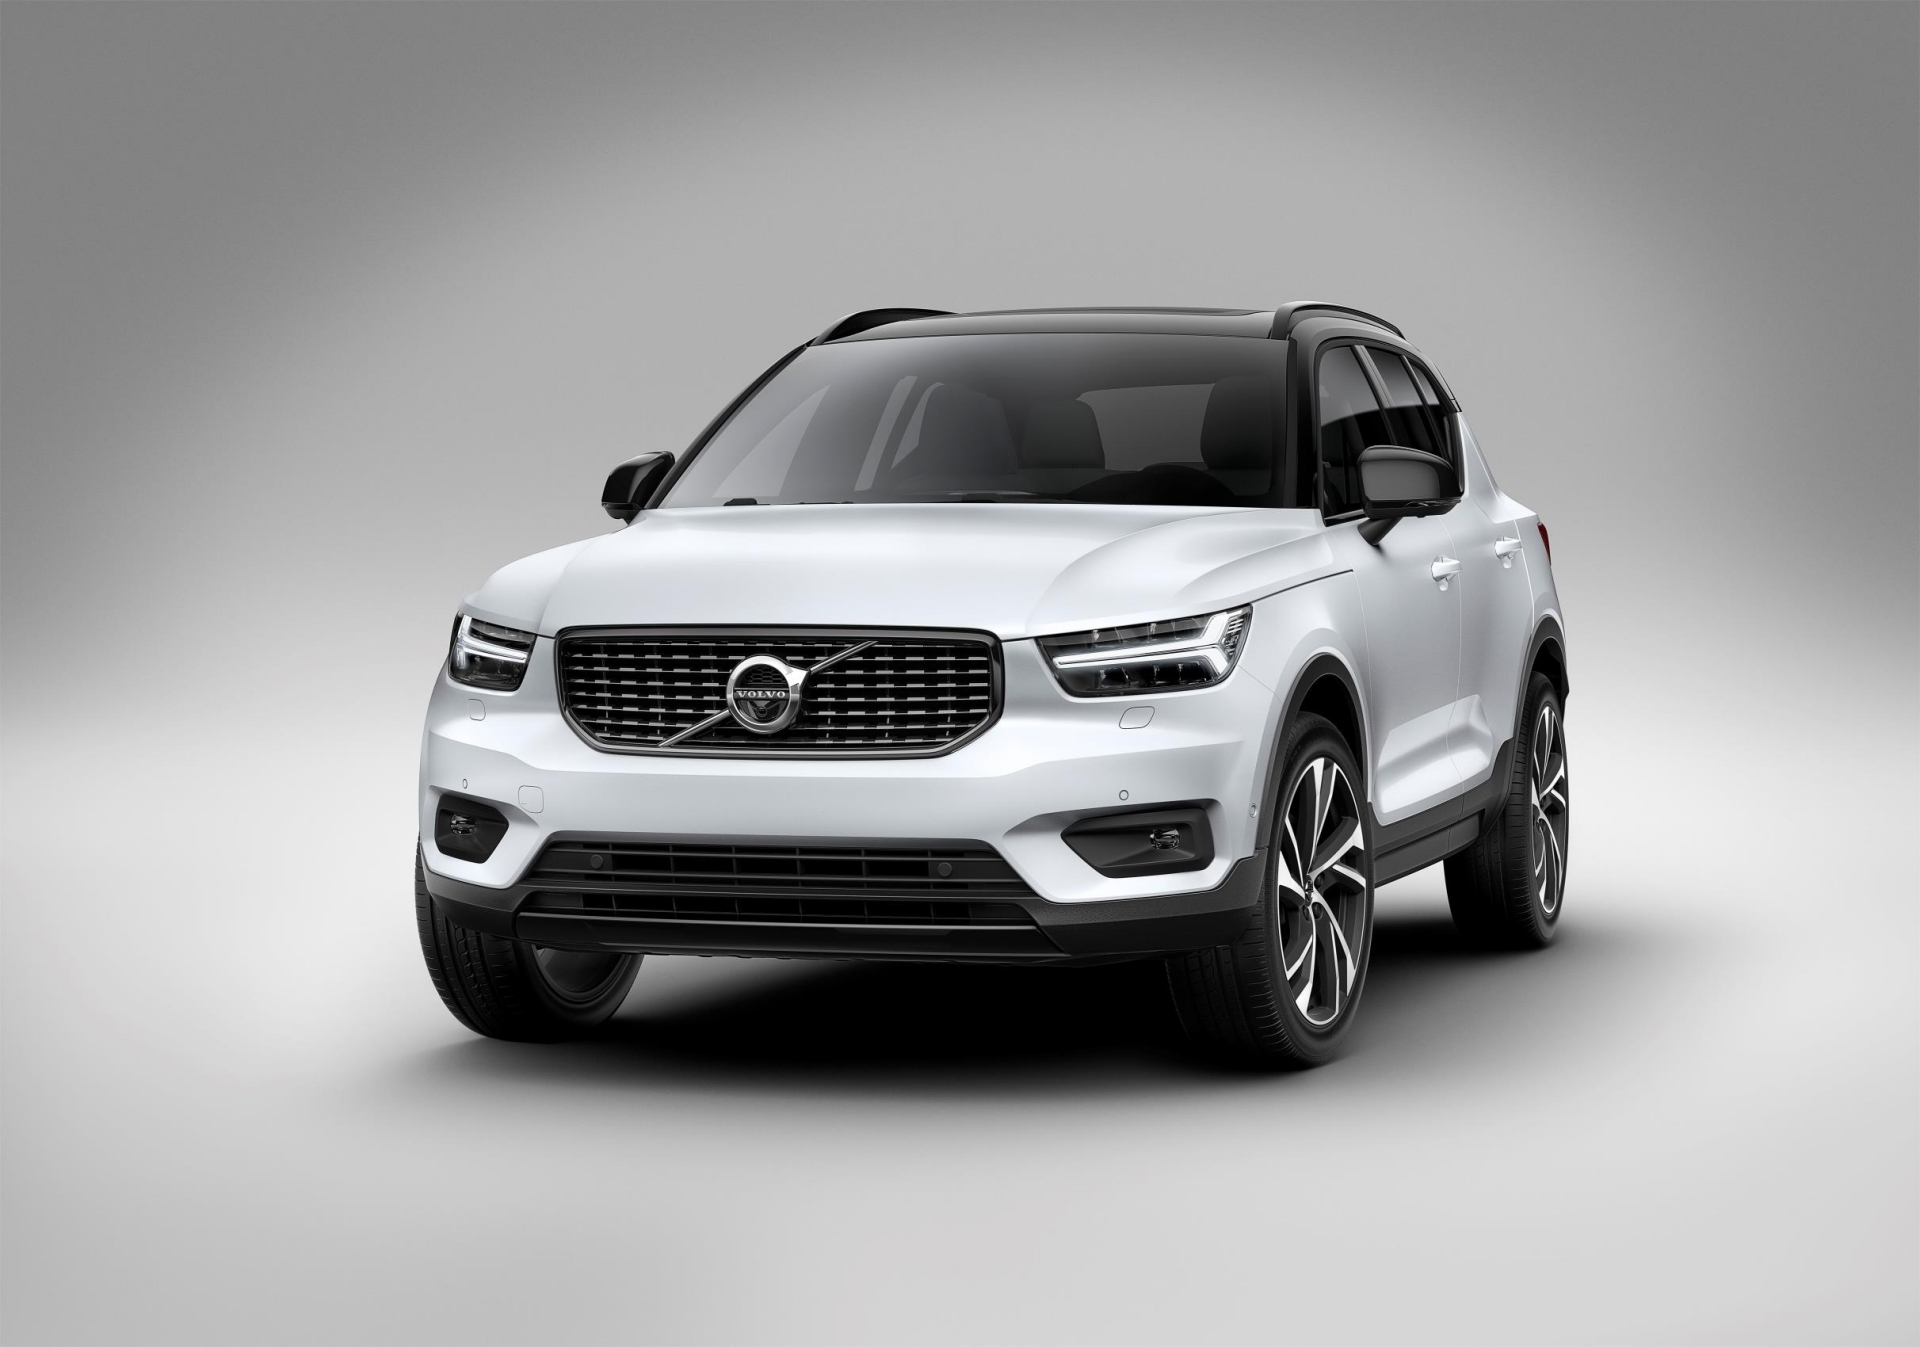 2018 Volvo XC40 - White Exterior - Front Side View